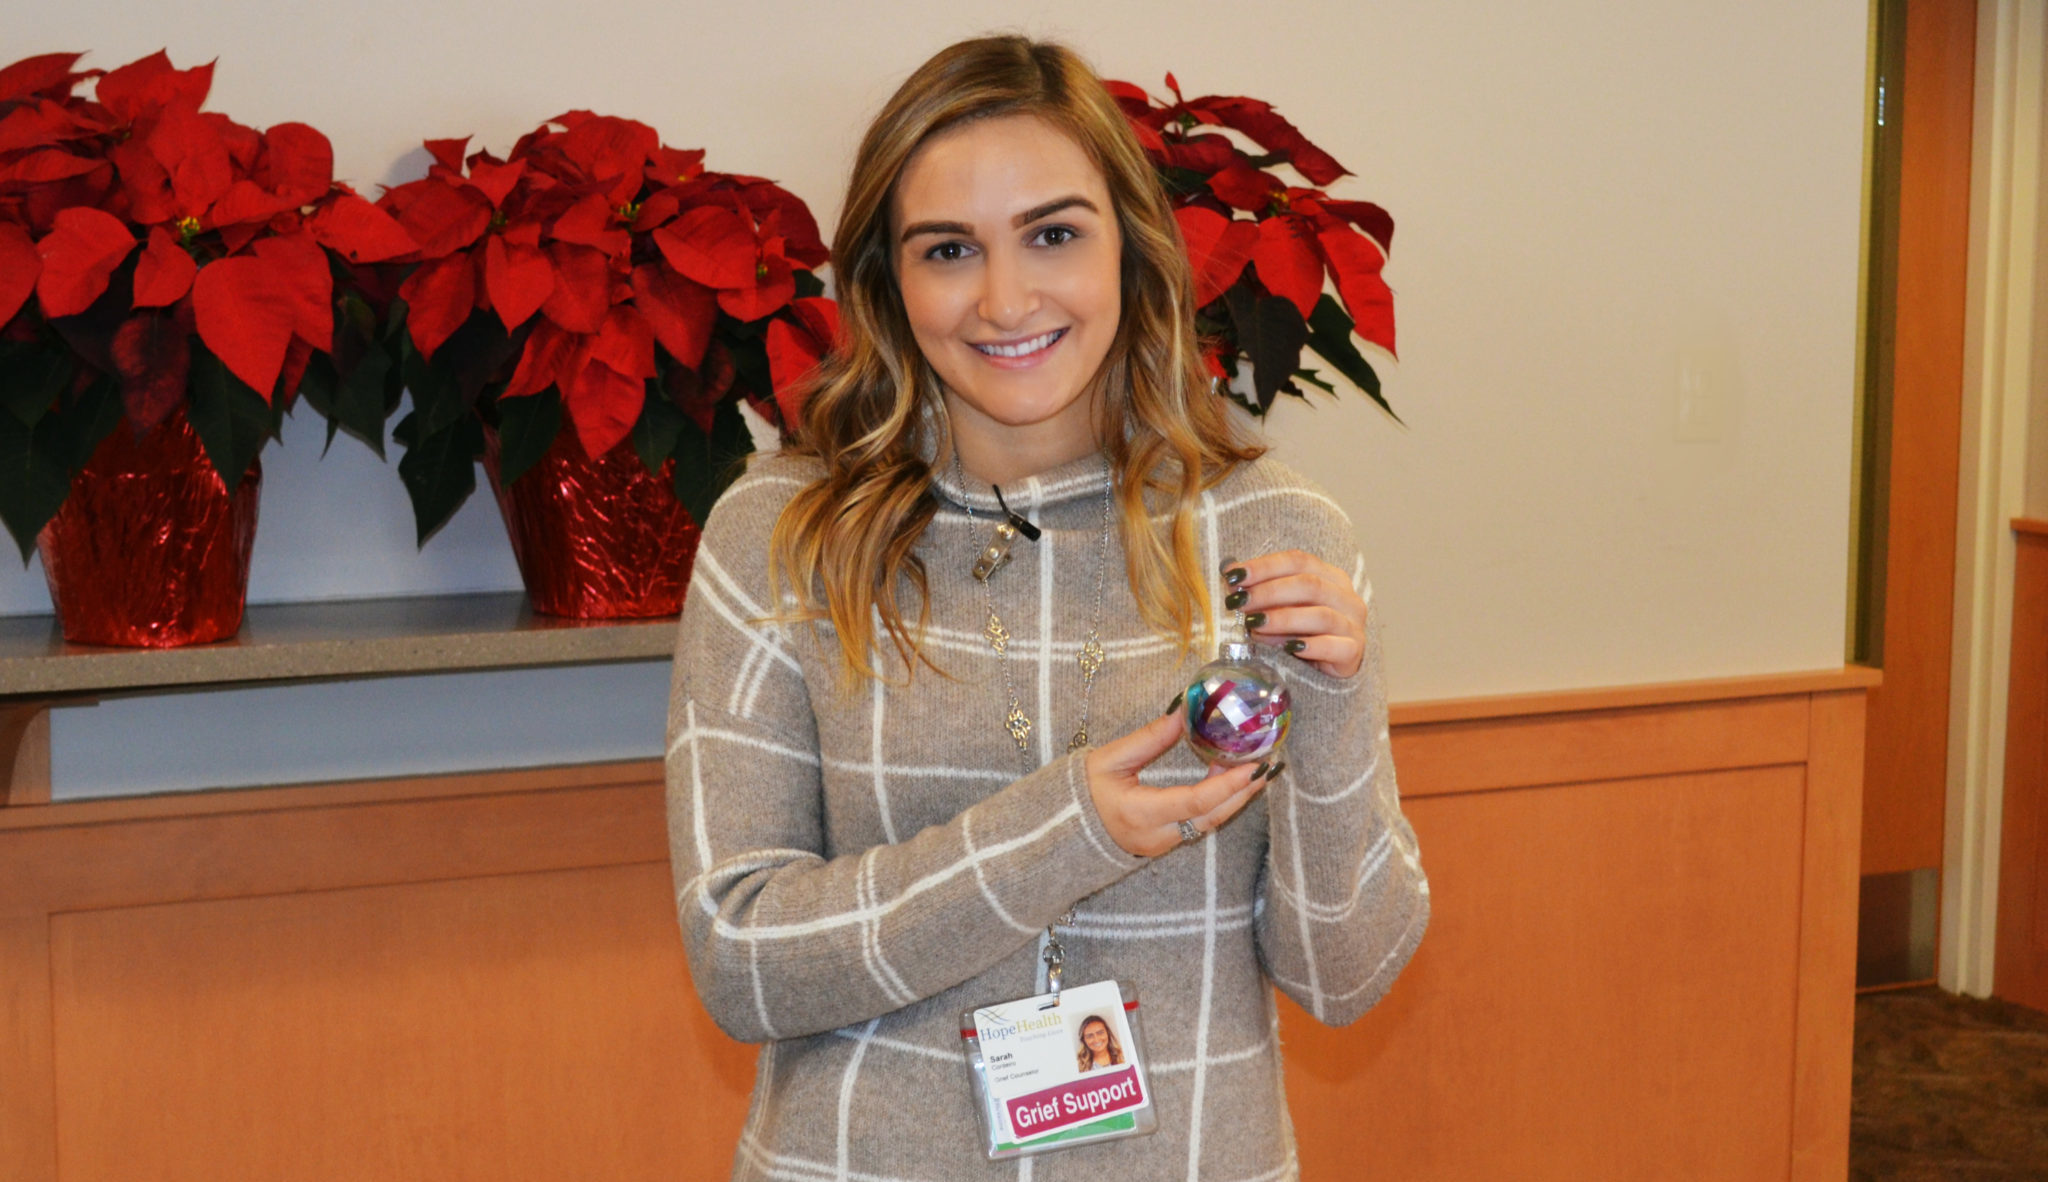 Young woman smiling with holiday remembrance ornament in her hand